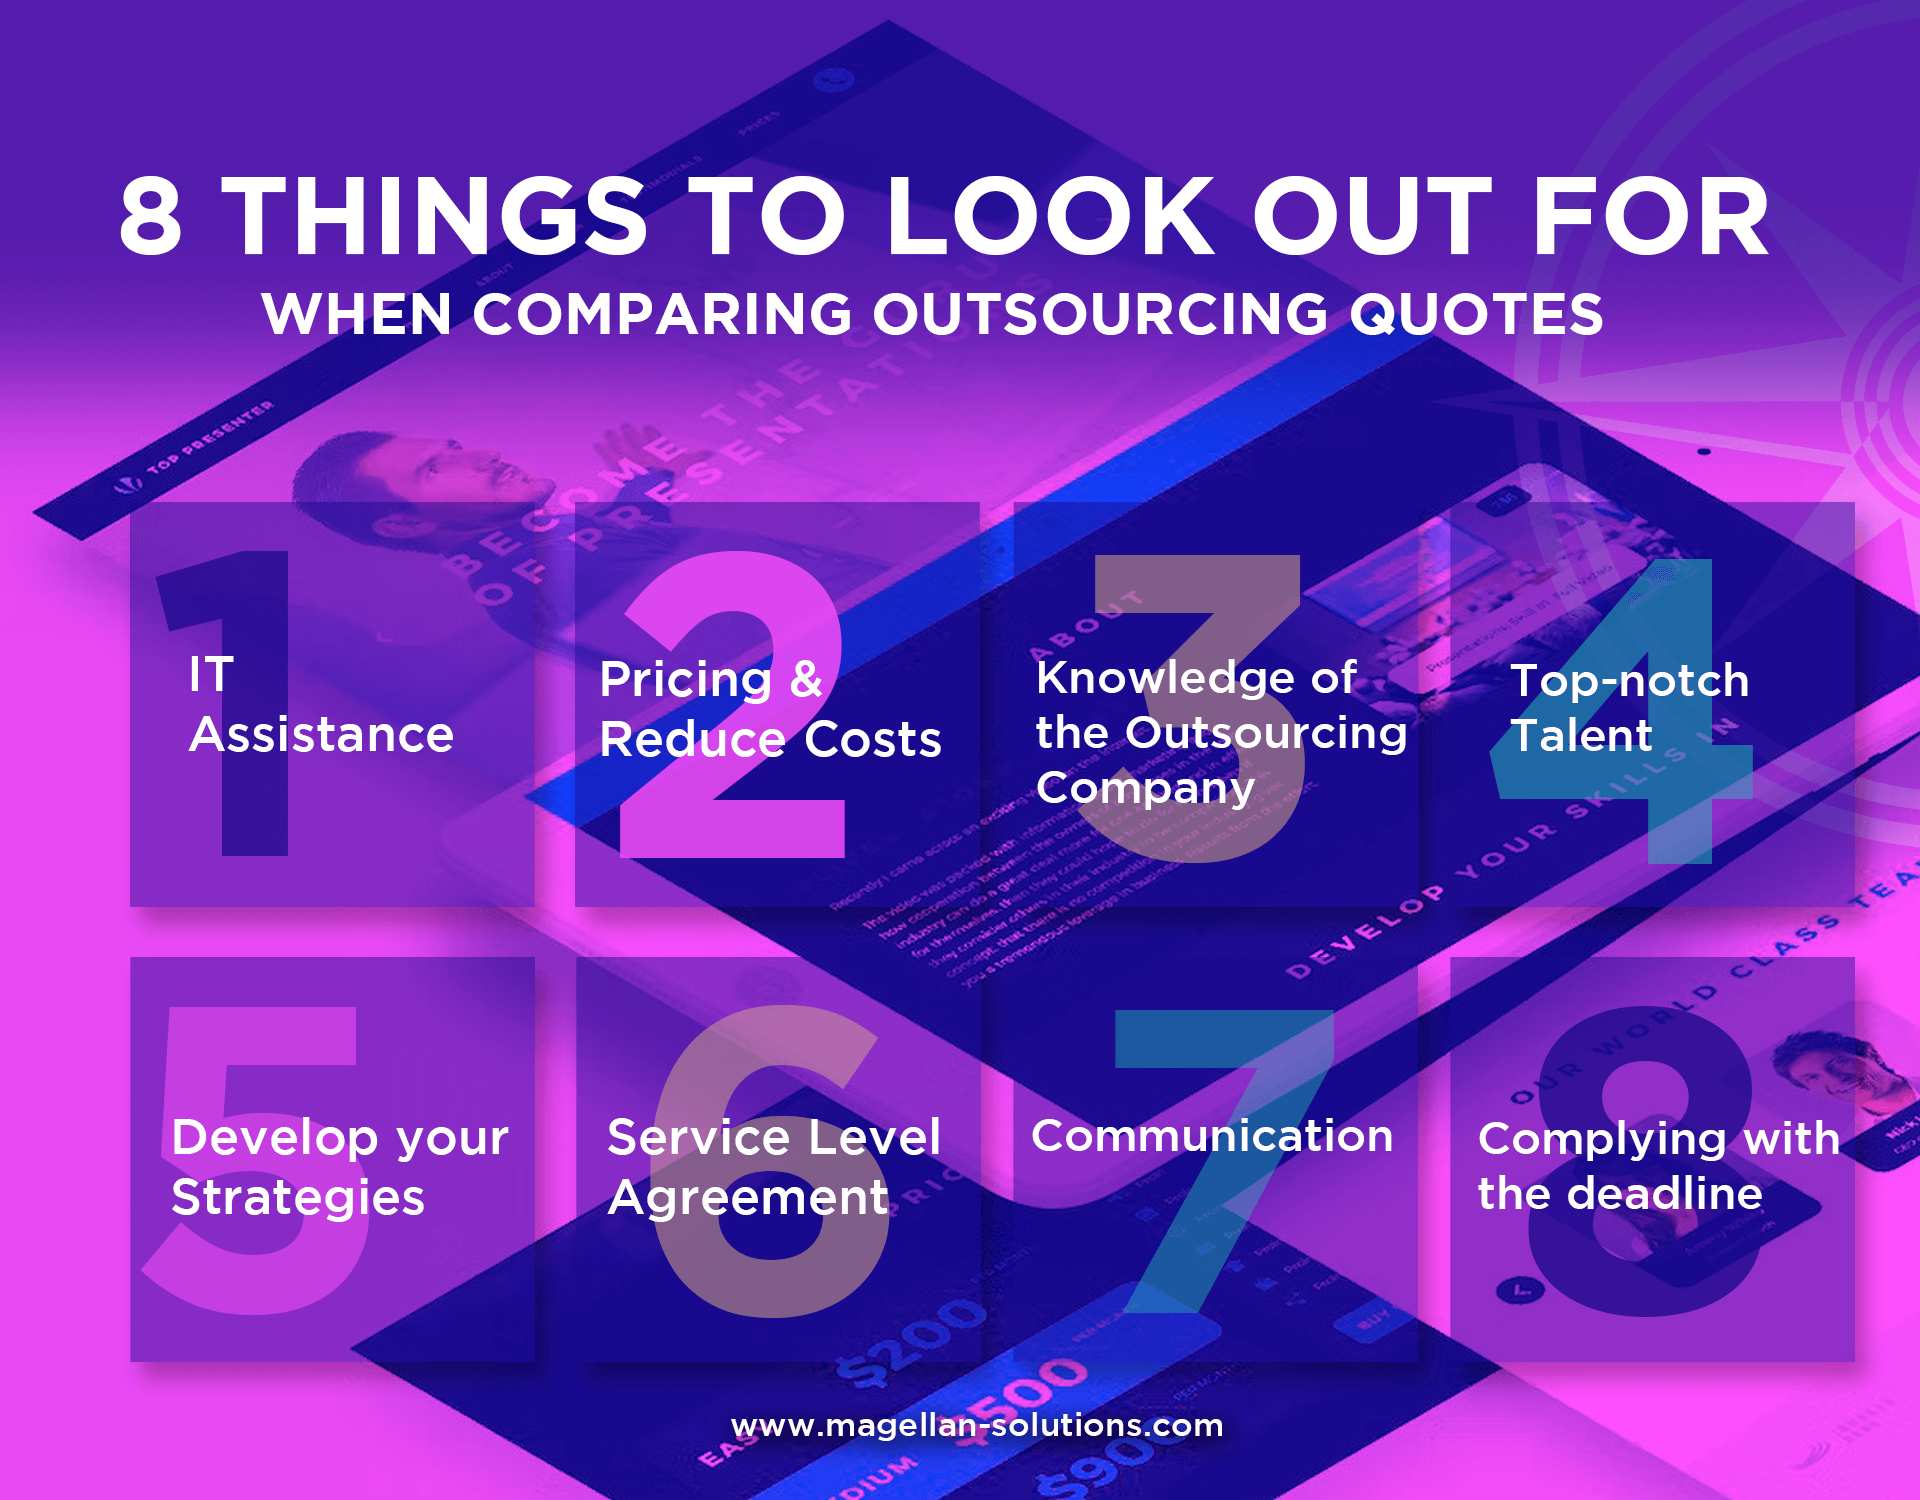 8 Things to Look Out For When Comparing Outsourcing Quotes 